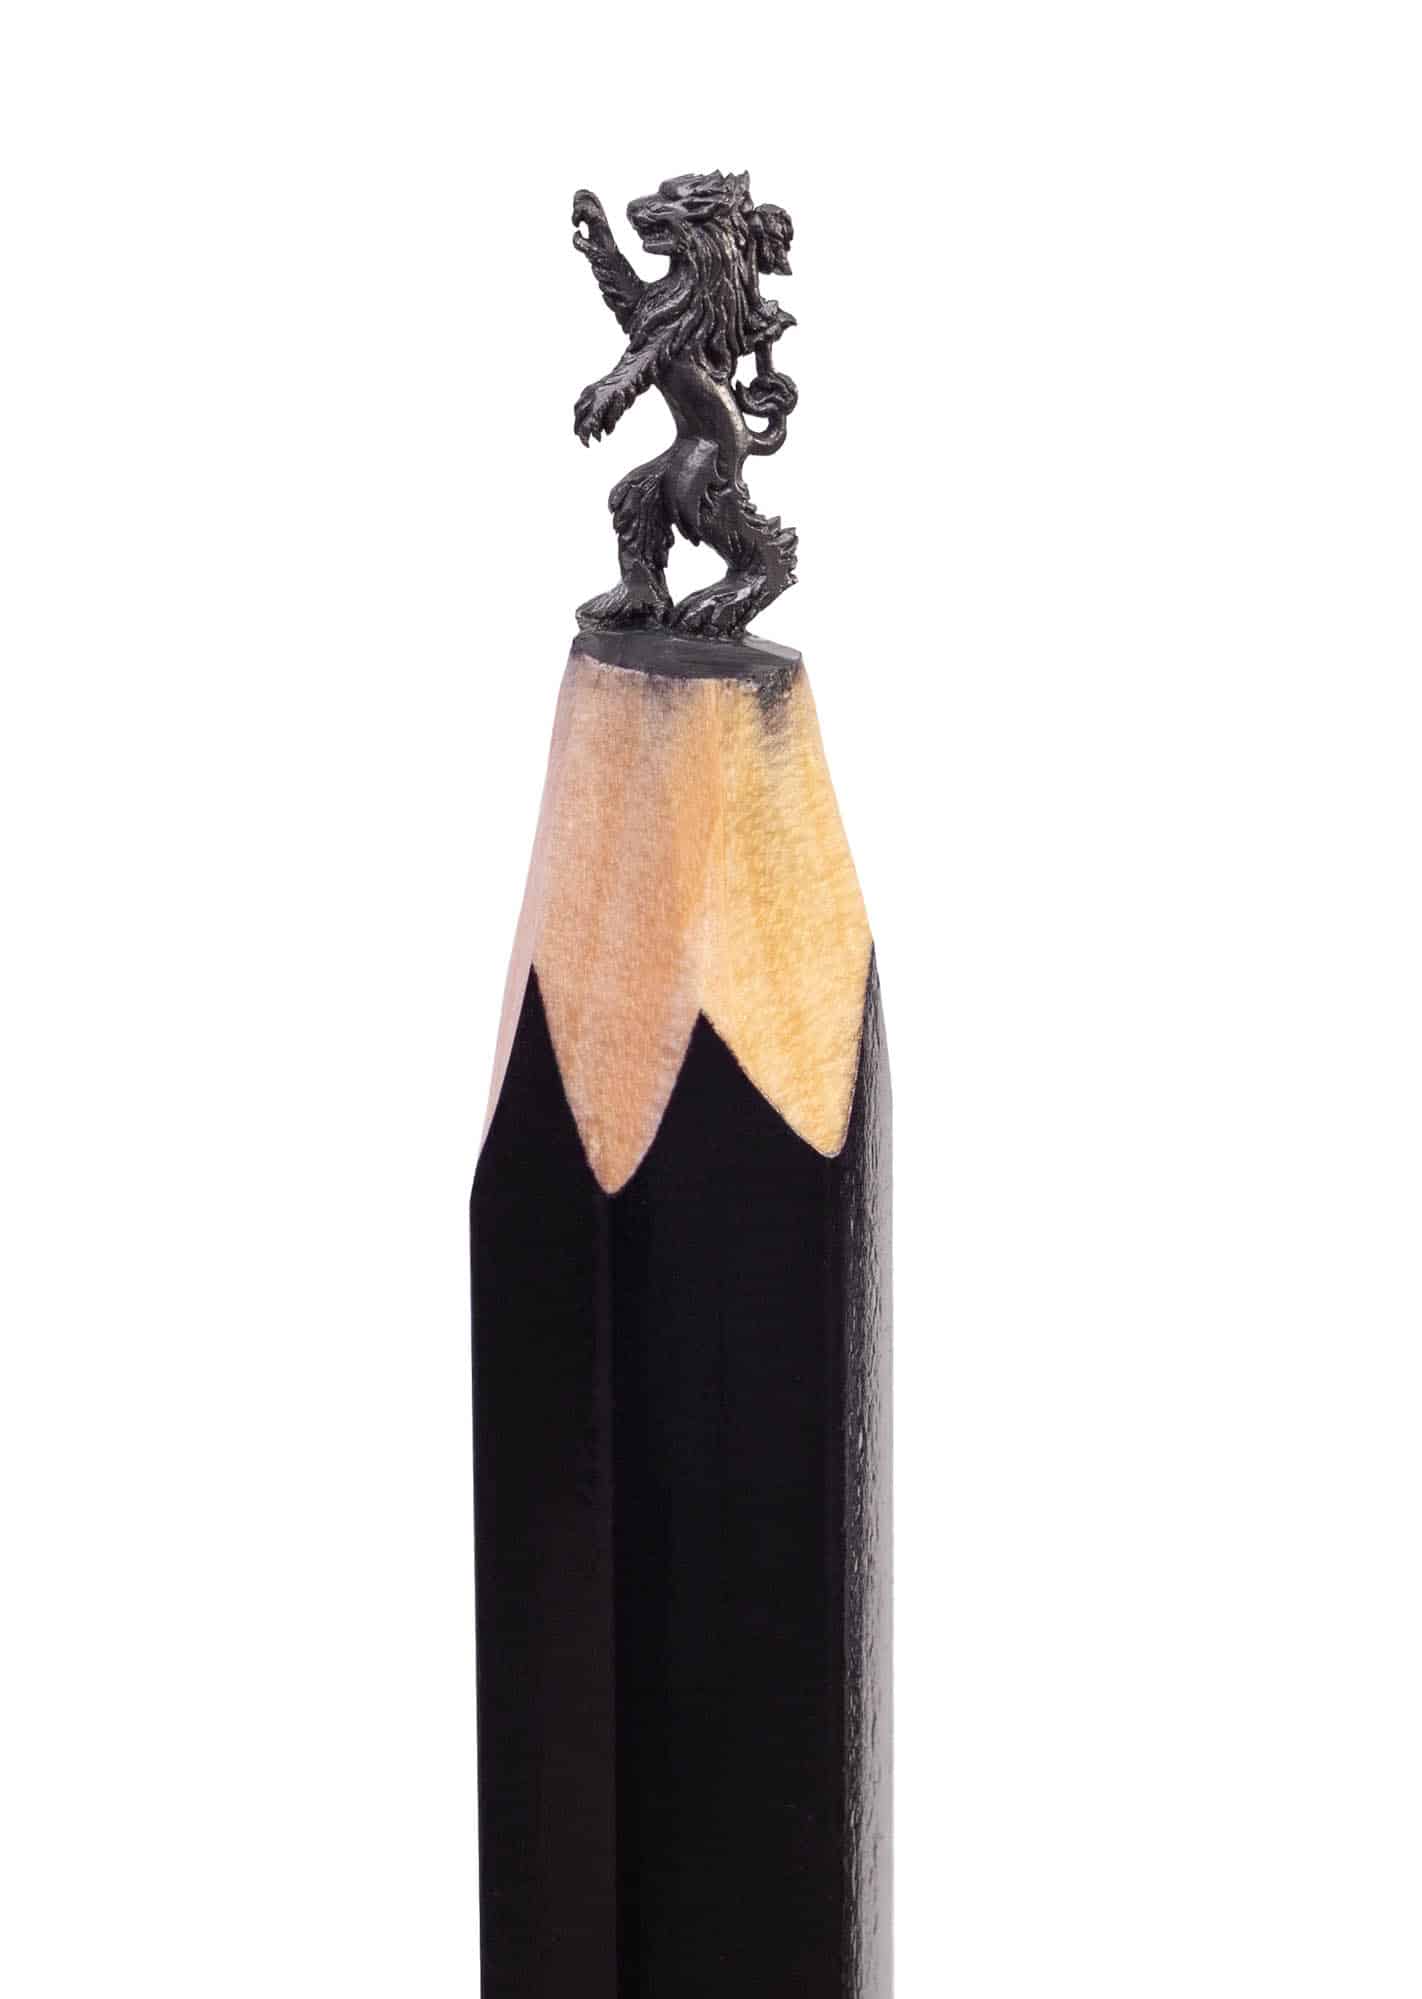 Game of Thrones House of Lannister Lion carved on the tip of a black pencil.